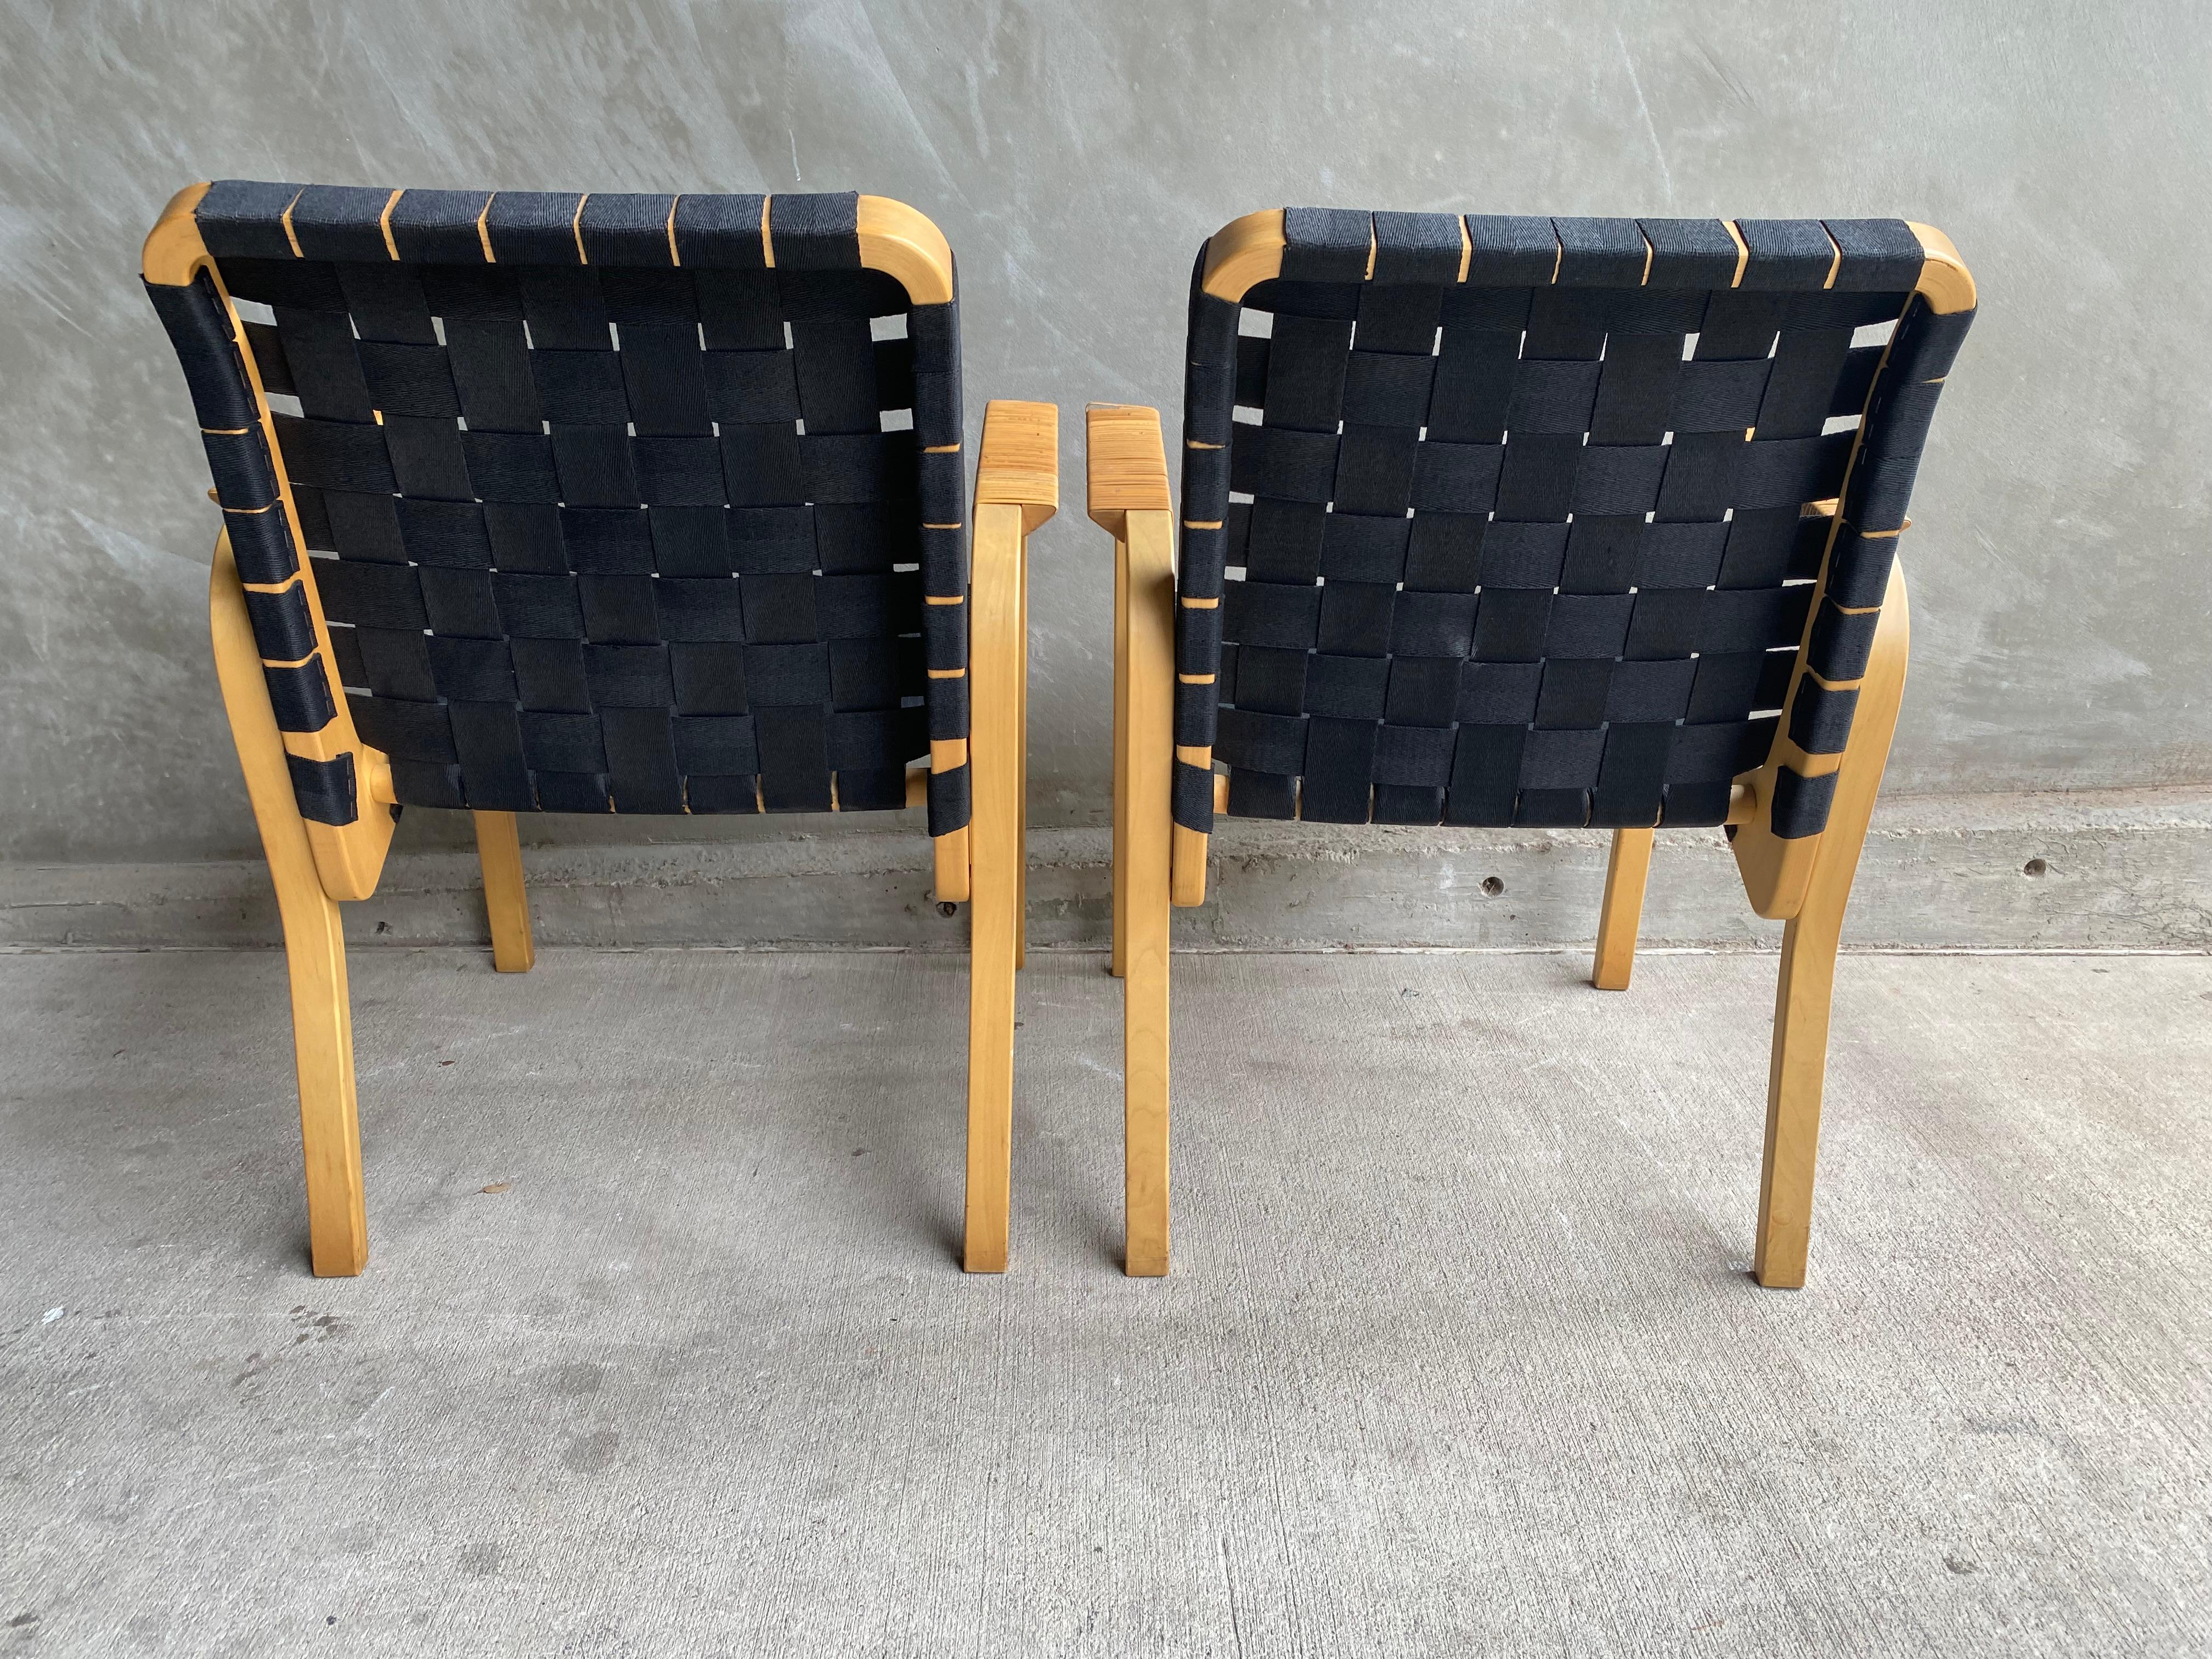 Set of 4 Alvar Aalto Chairs with Black Straps, Finland, 1960's For Sale 2